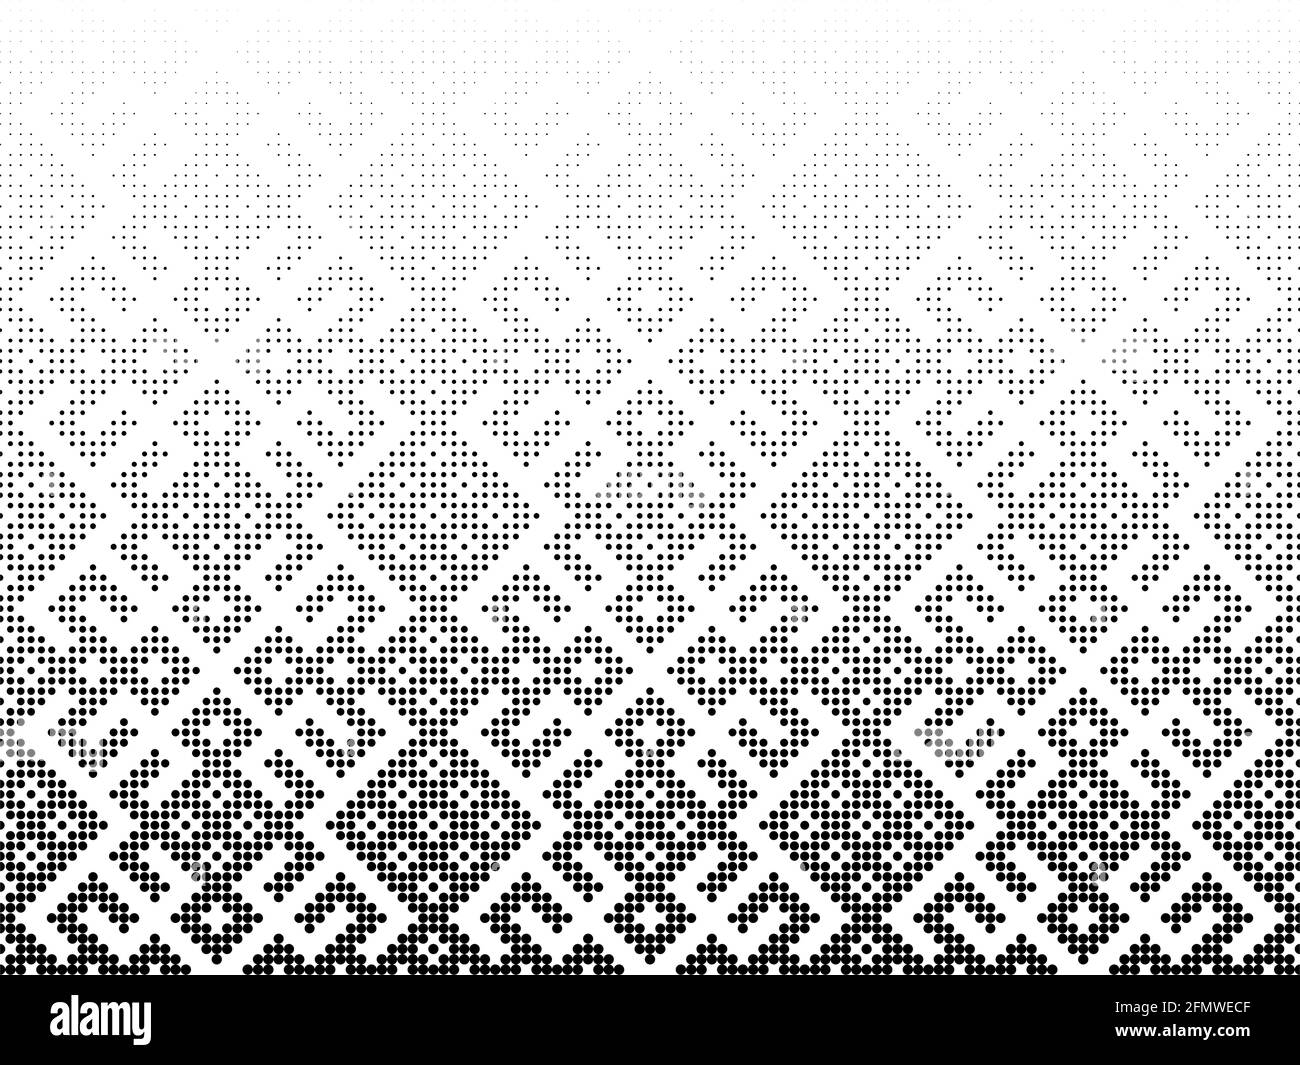 Wallpaper vector vectors Black and White Stock Photos & Images - Alamy